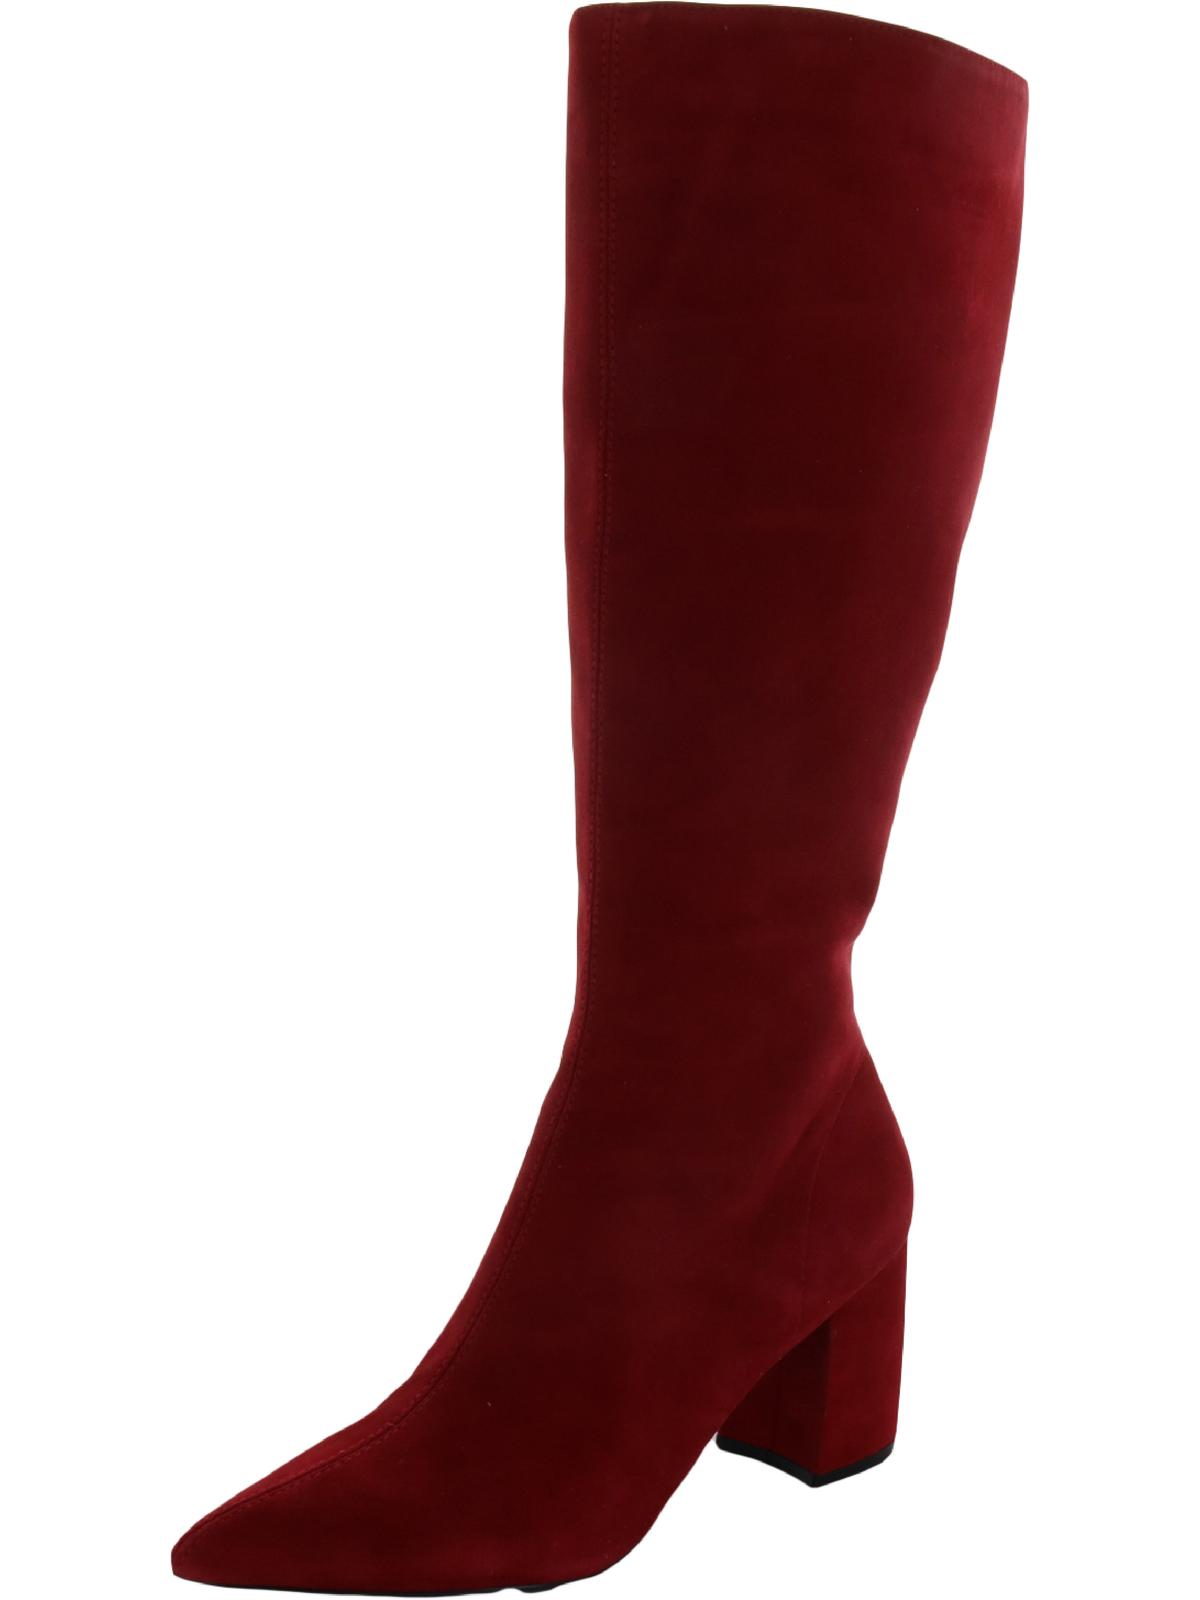 STEVE MADDEN Nieve Womens Suede Pointed Toe Knee-High Boots